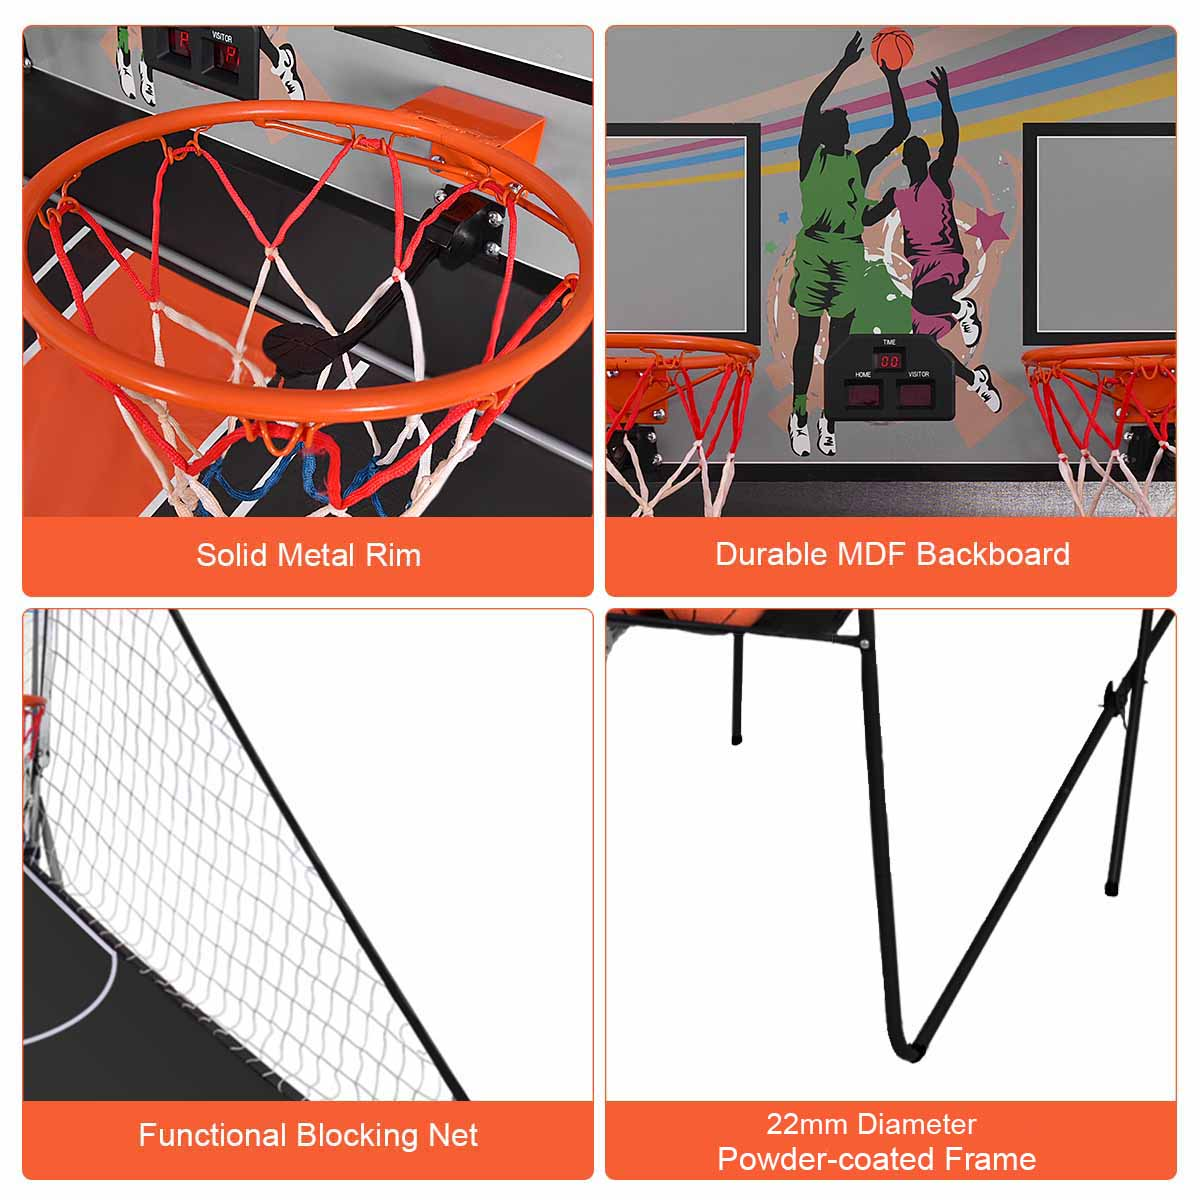 Enhance Your Game Room with 8-in-1 Hoop Arcade Fun